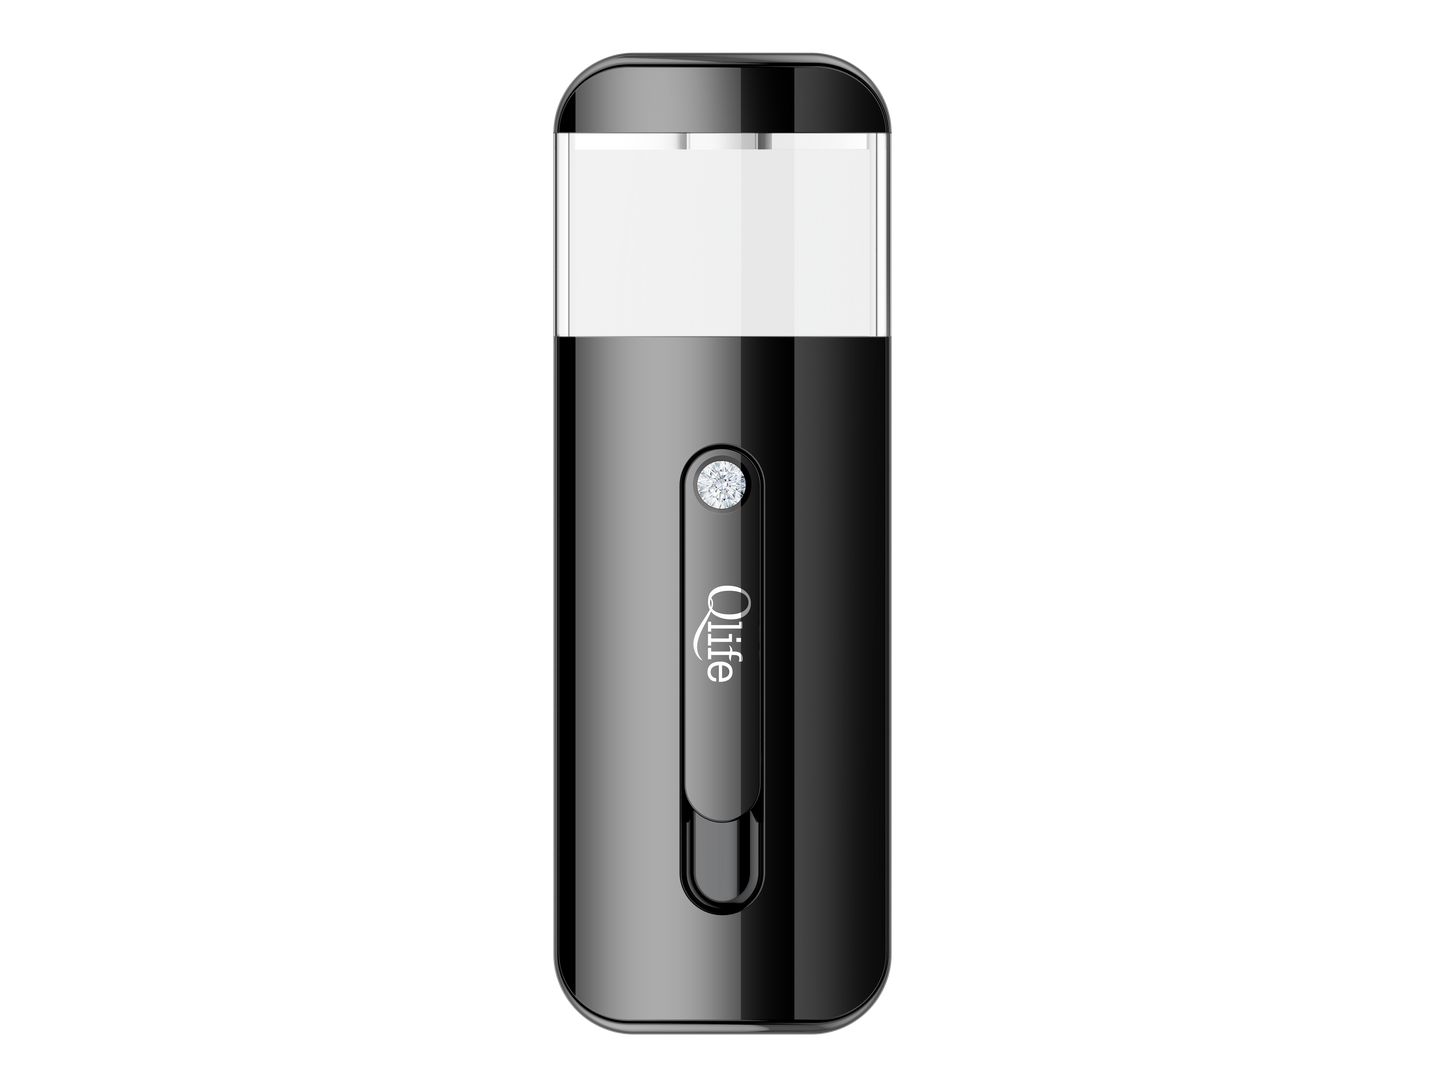 ELW-QMIST BLACK-BUNDLE-50 (2 boxes of 50 ppm water and 1 x Q-Mist Hydrogen Water Diffuser Black).Save $40. The price includes S&H